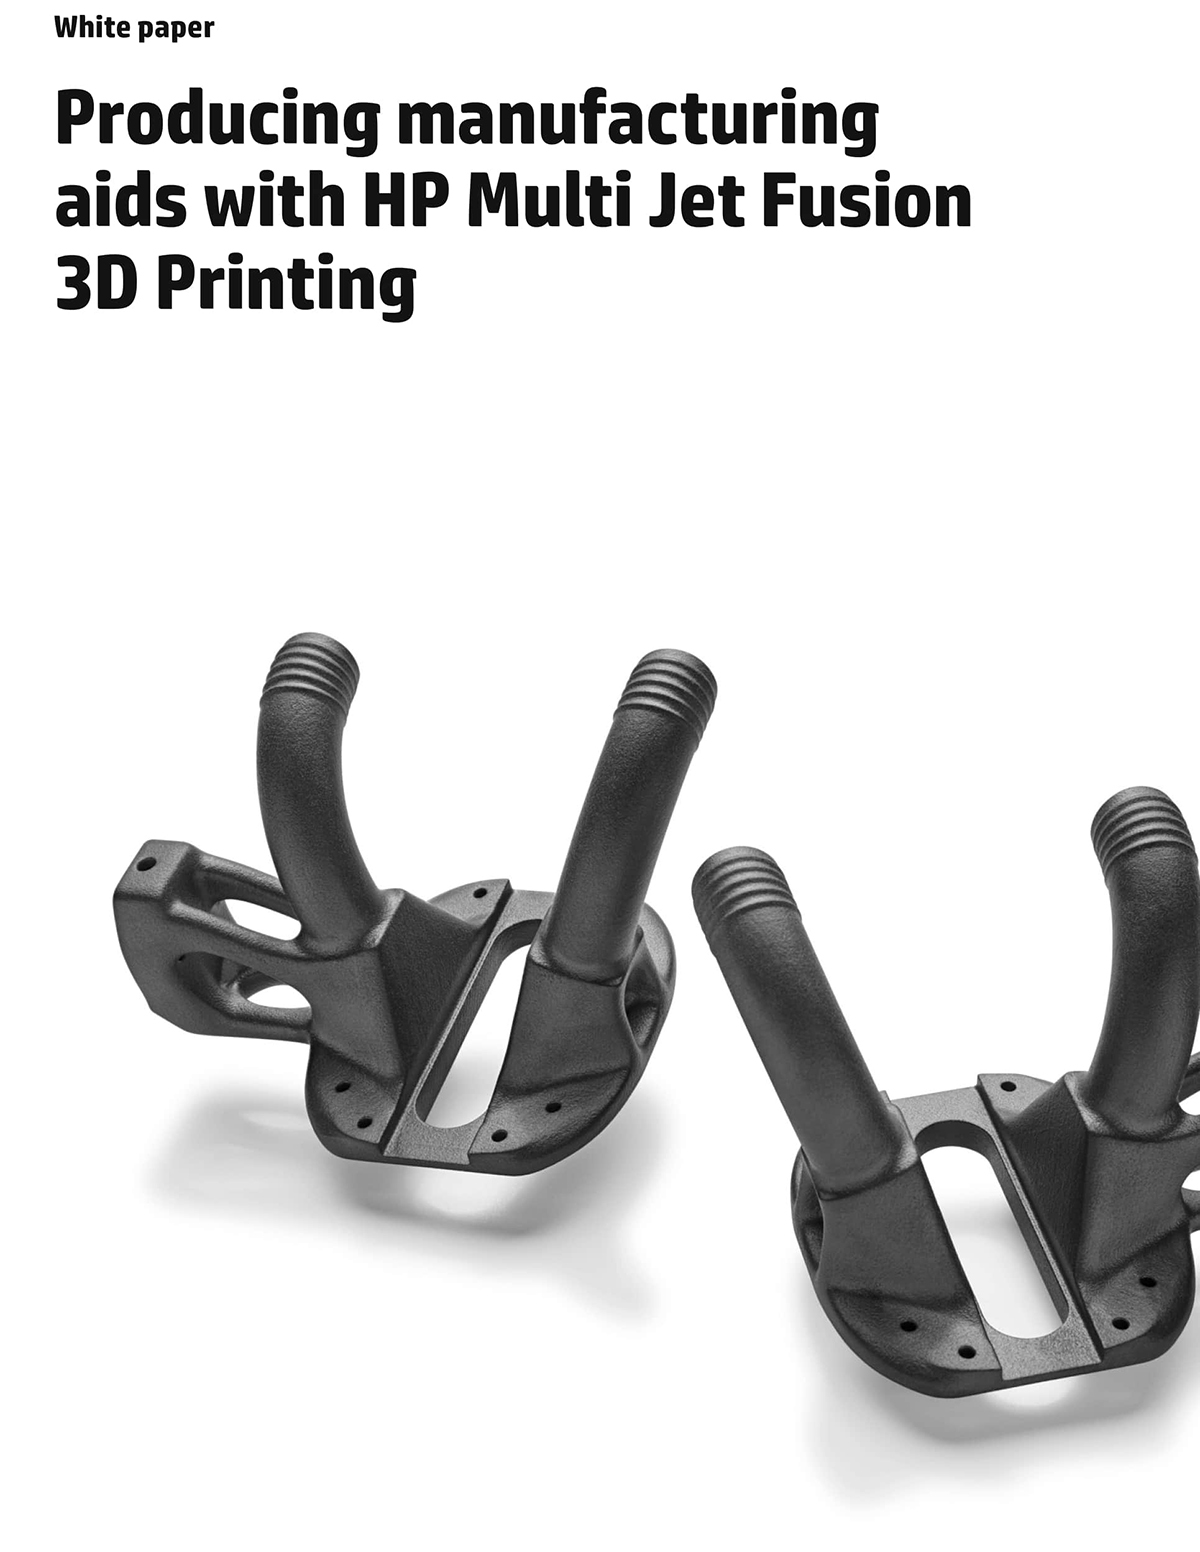 Producing manufacturing aids with HP Multi Jet Fusion 3D Printing